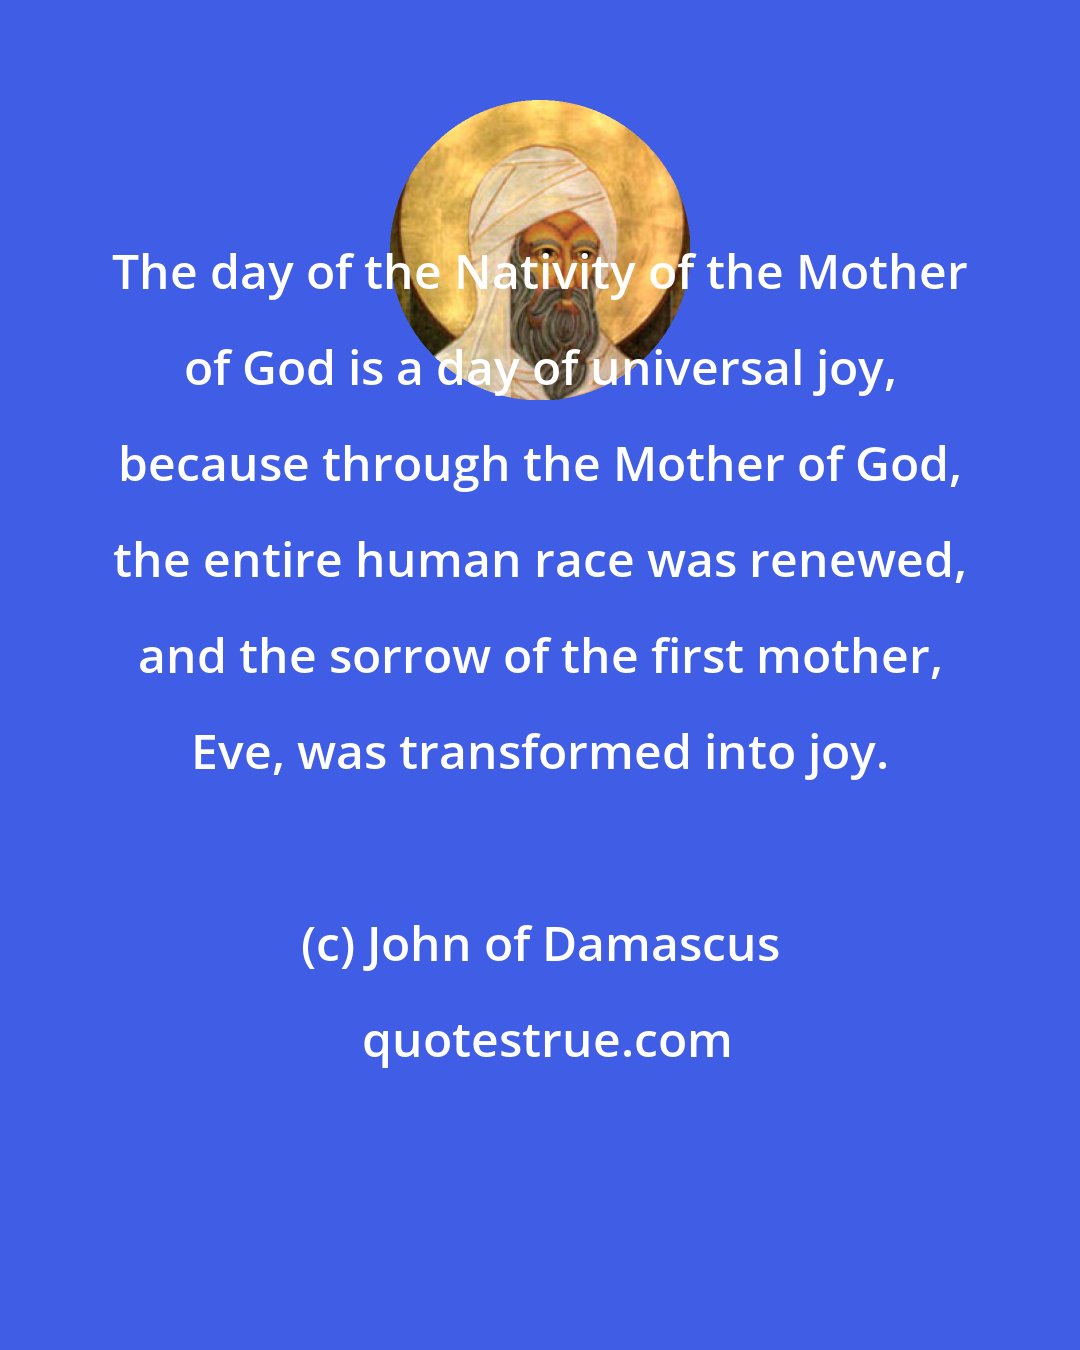 John of Damascus: The day of the Nativity of the Mother of God is a day of universal joy, because through the Mother of God, the entire human race was renewed, and the sorrow of the first mother, Eve, was transformed into joy.